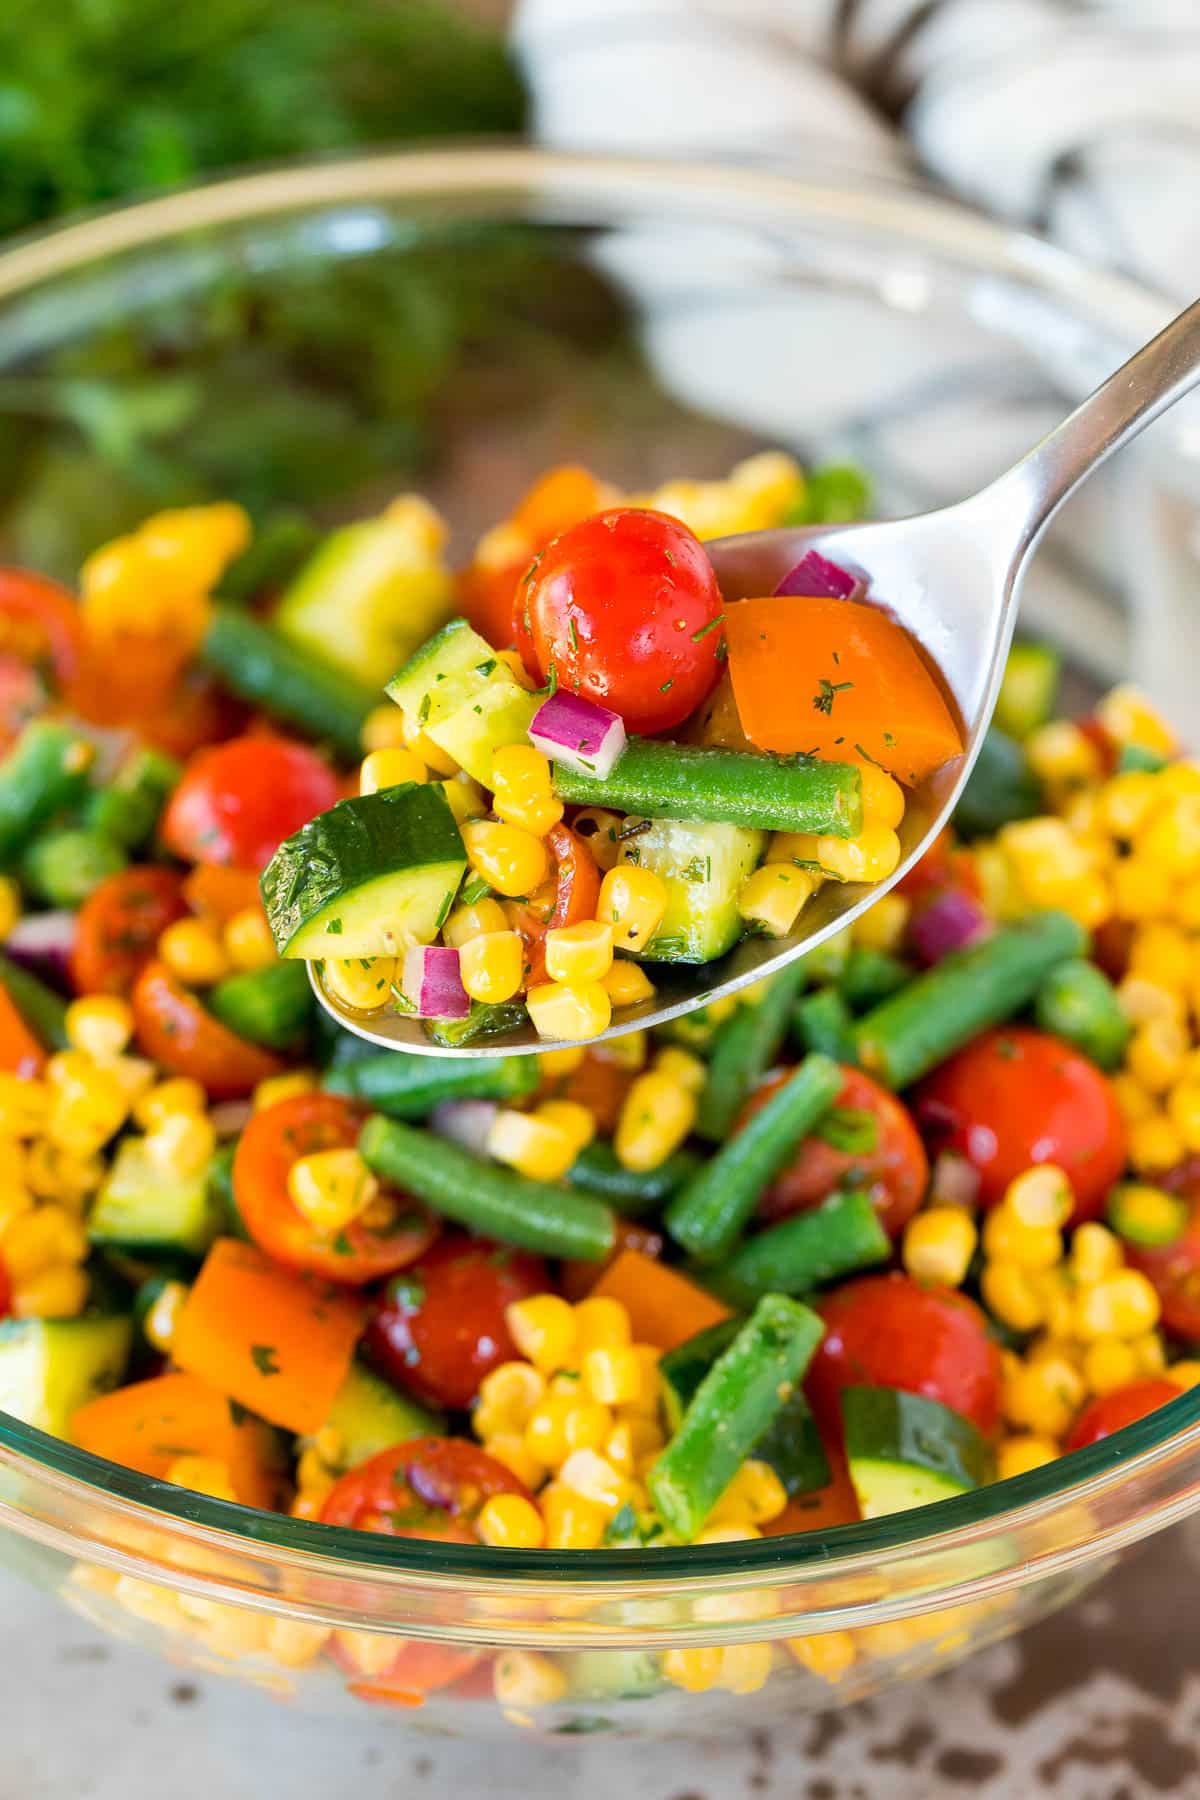 A spoon serving up a portion of vegetable salad.